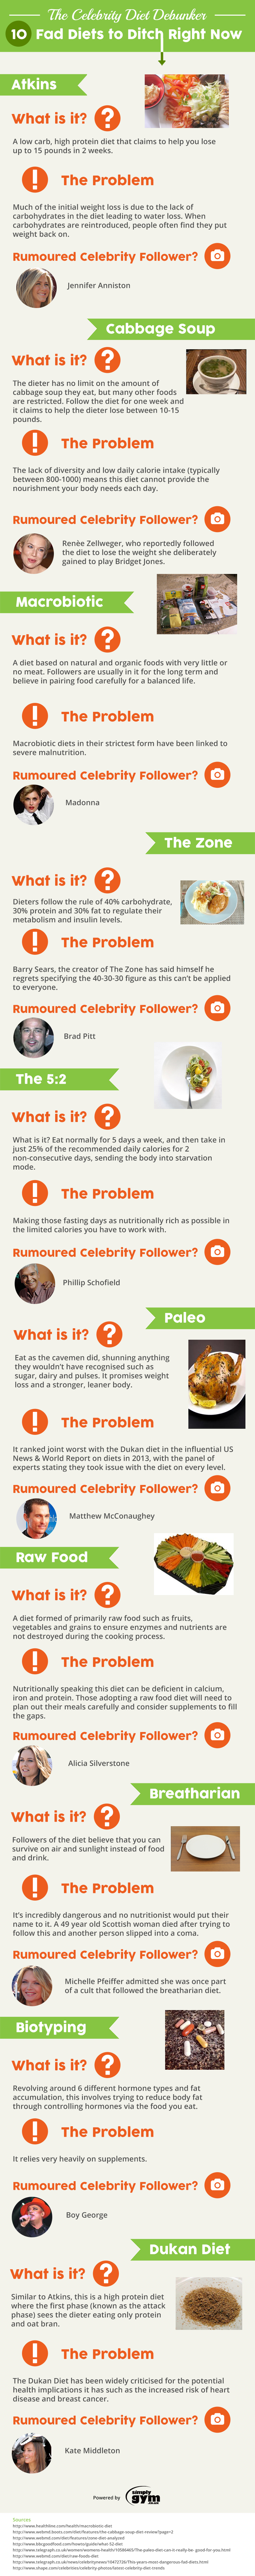 infographic-updated fad diets 2